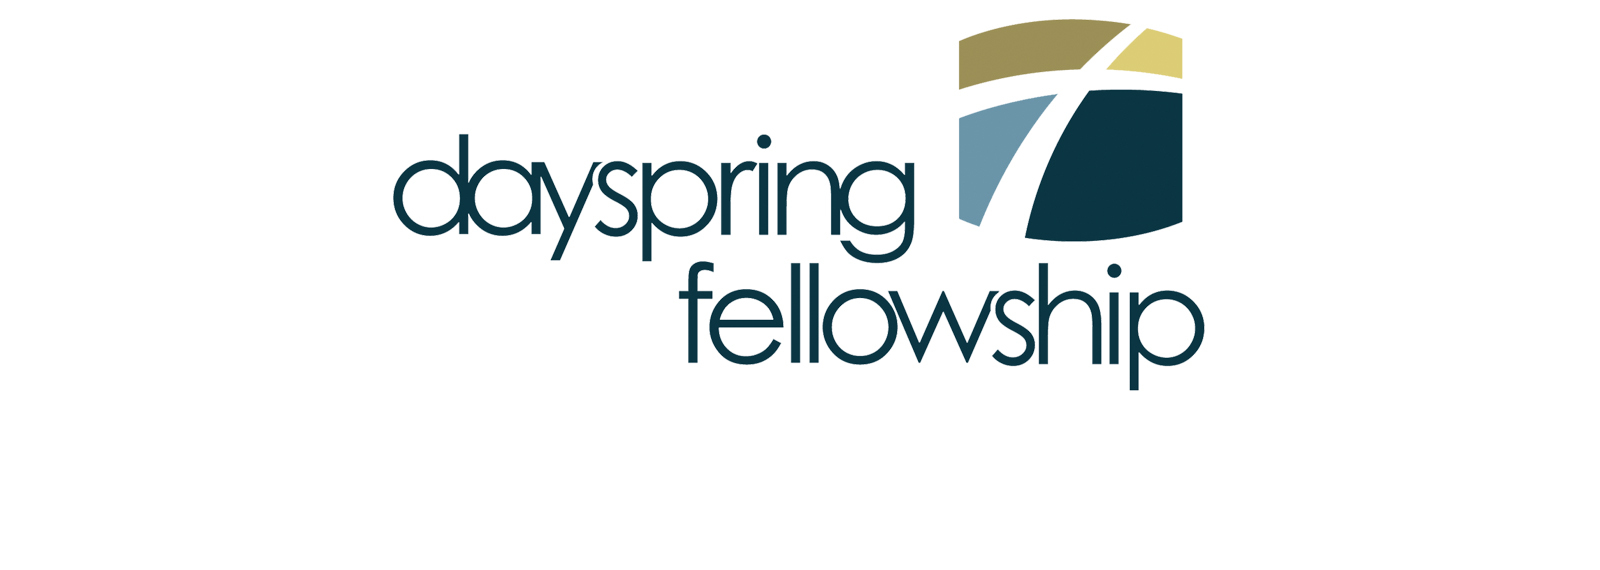 Dayspring Fellowship Podcasts